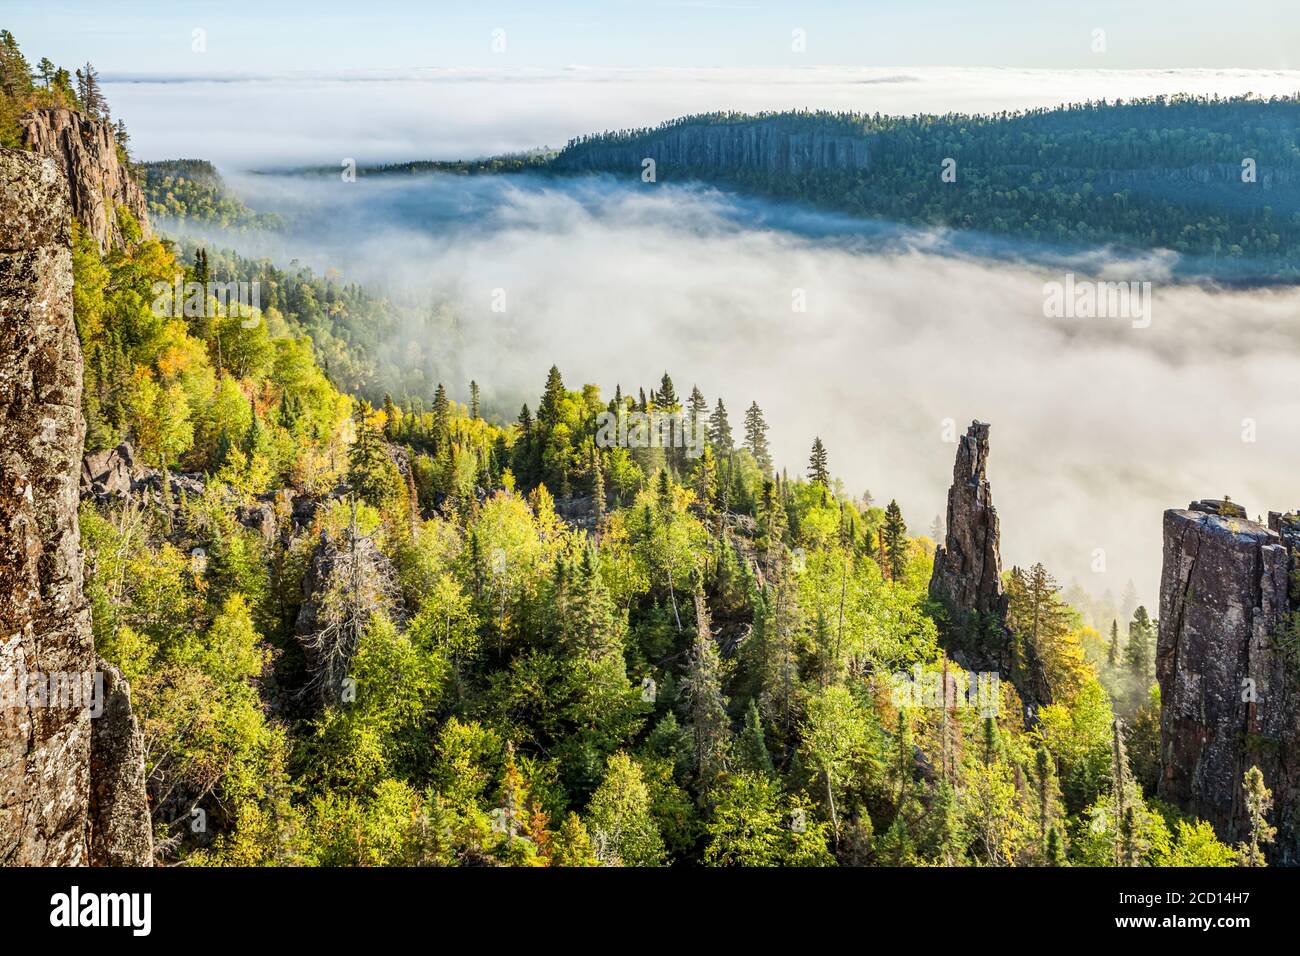 Sunrise over a misty, foggy valley in the Canadian Shield; Dorian, Ontario, Canada Stock Photo